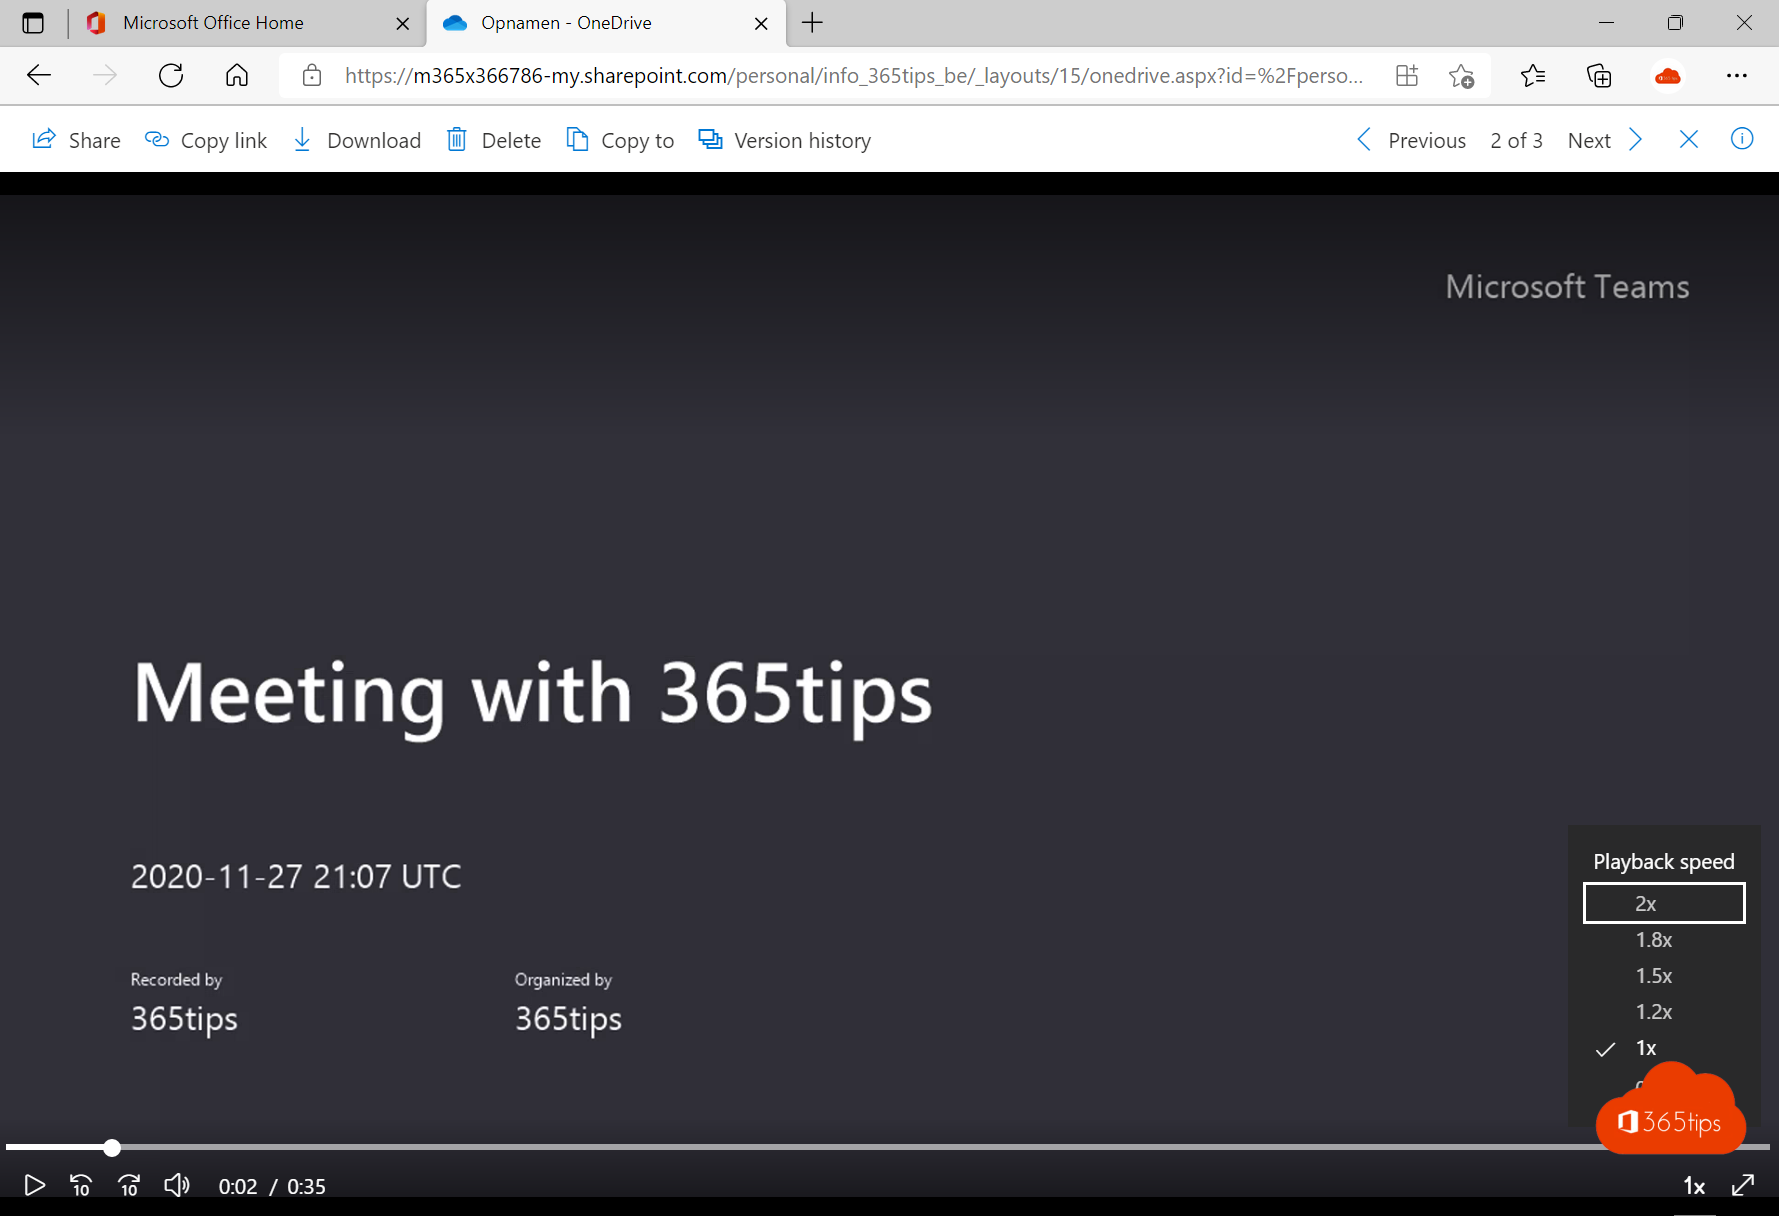 How to play back a recording of a MicrosoftTeams meeting in an accelerated manner? 🚀🕒